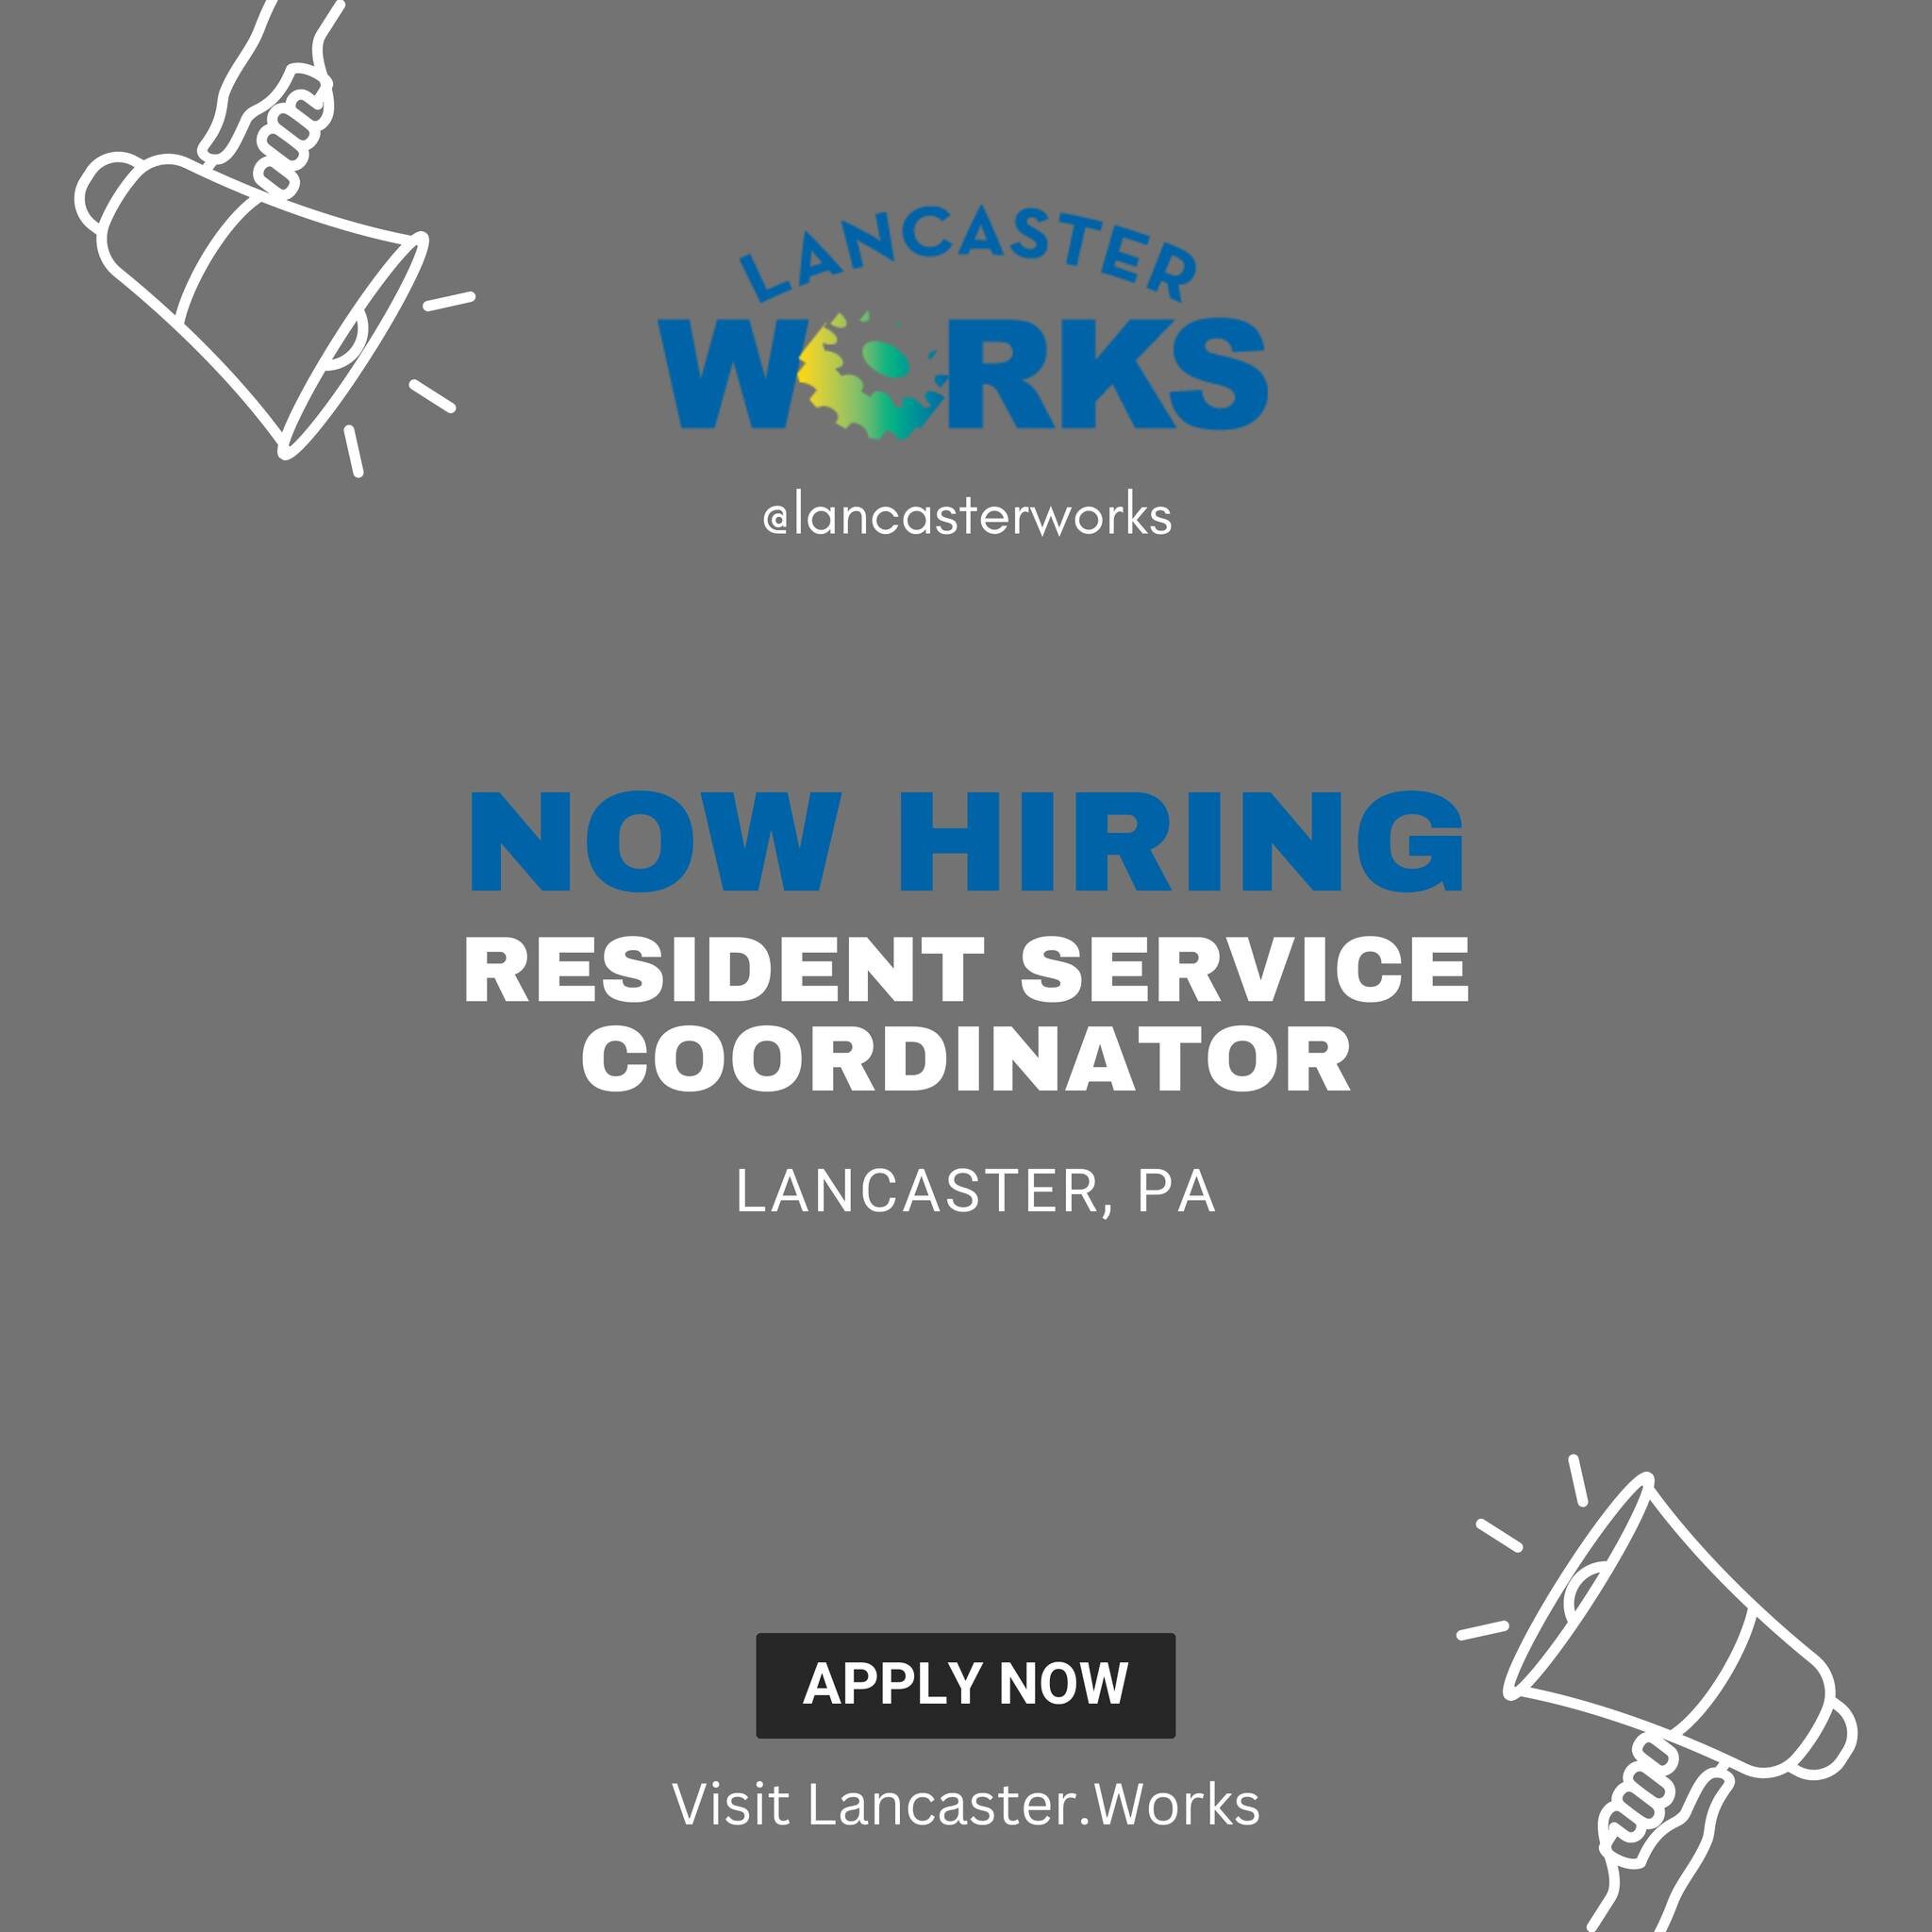 We're hiring a Resident Service Coordinator in Lancaster, PA.
Apply on our website today!